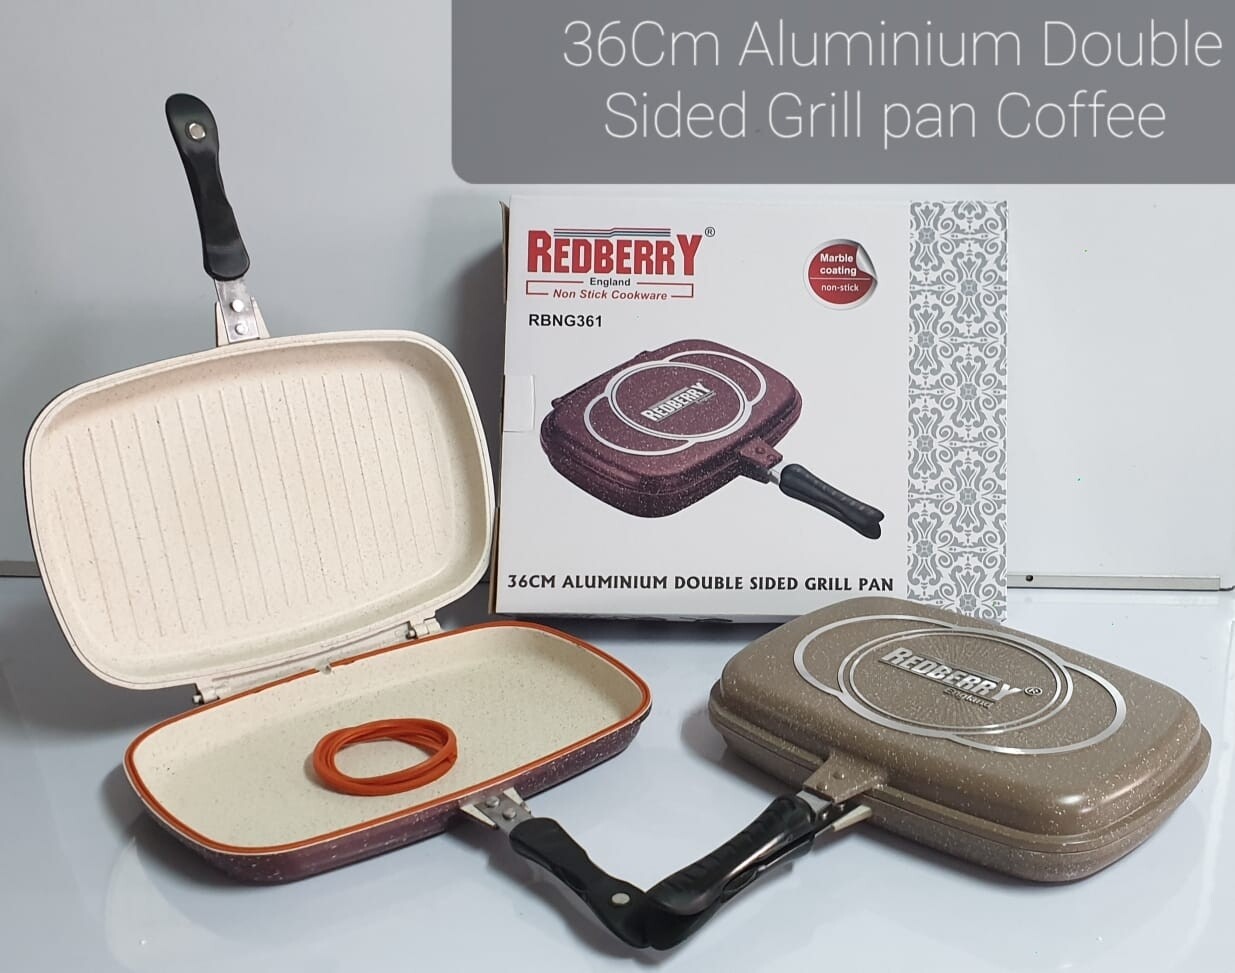 Redberry double sided grill pan aluminium 36cm